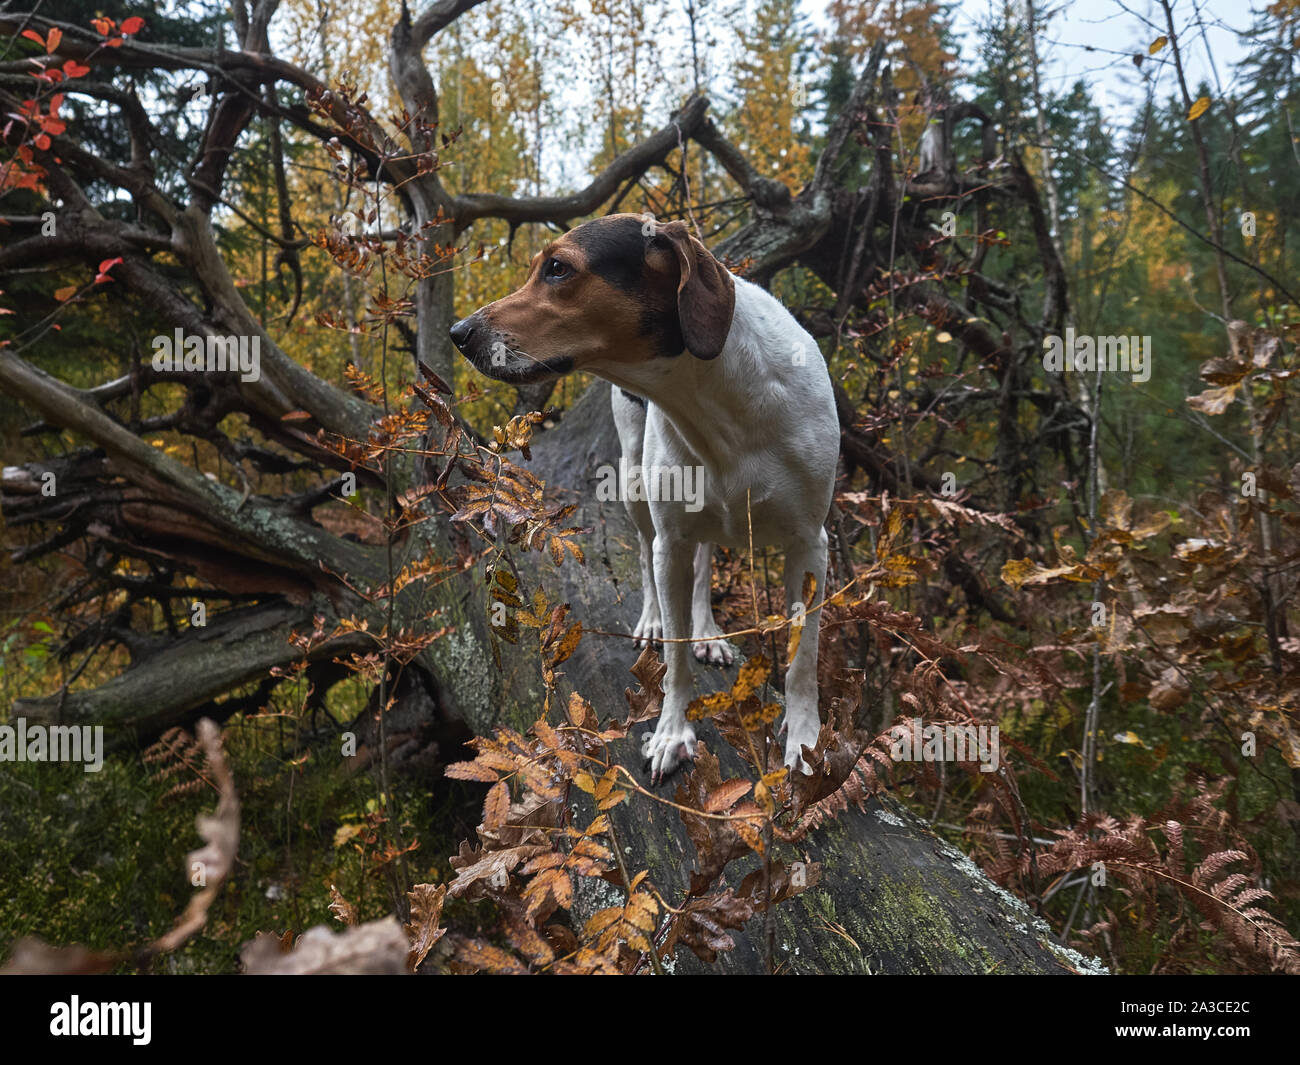 Yellow-black hunting dog looks into the distance in the autumn forest. Stock Photo